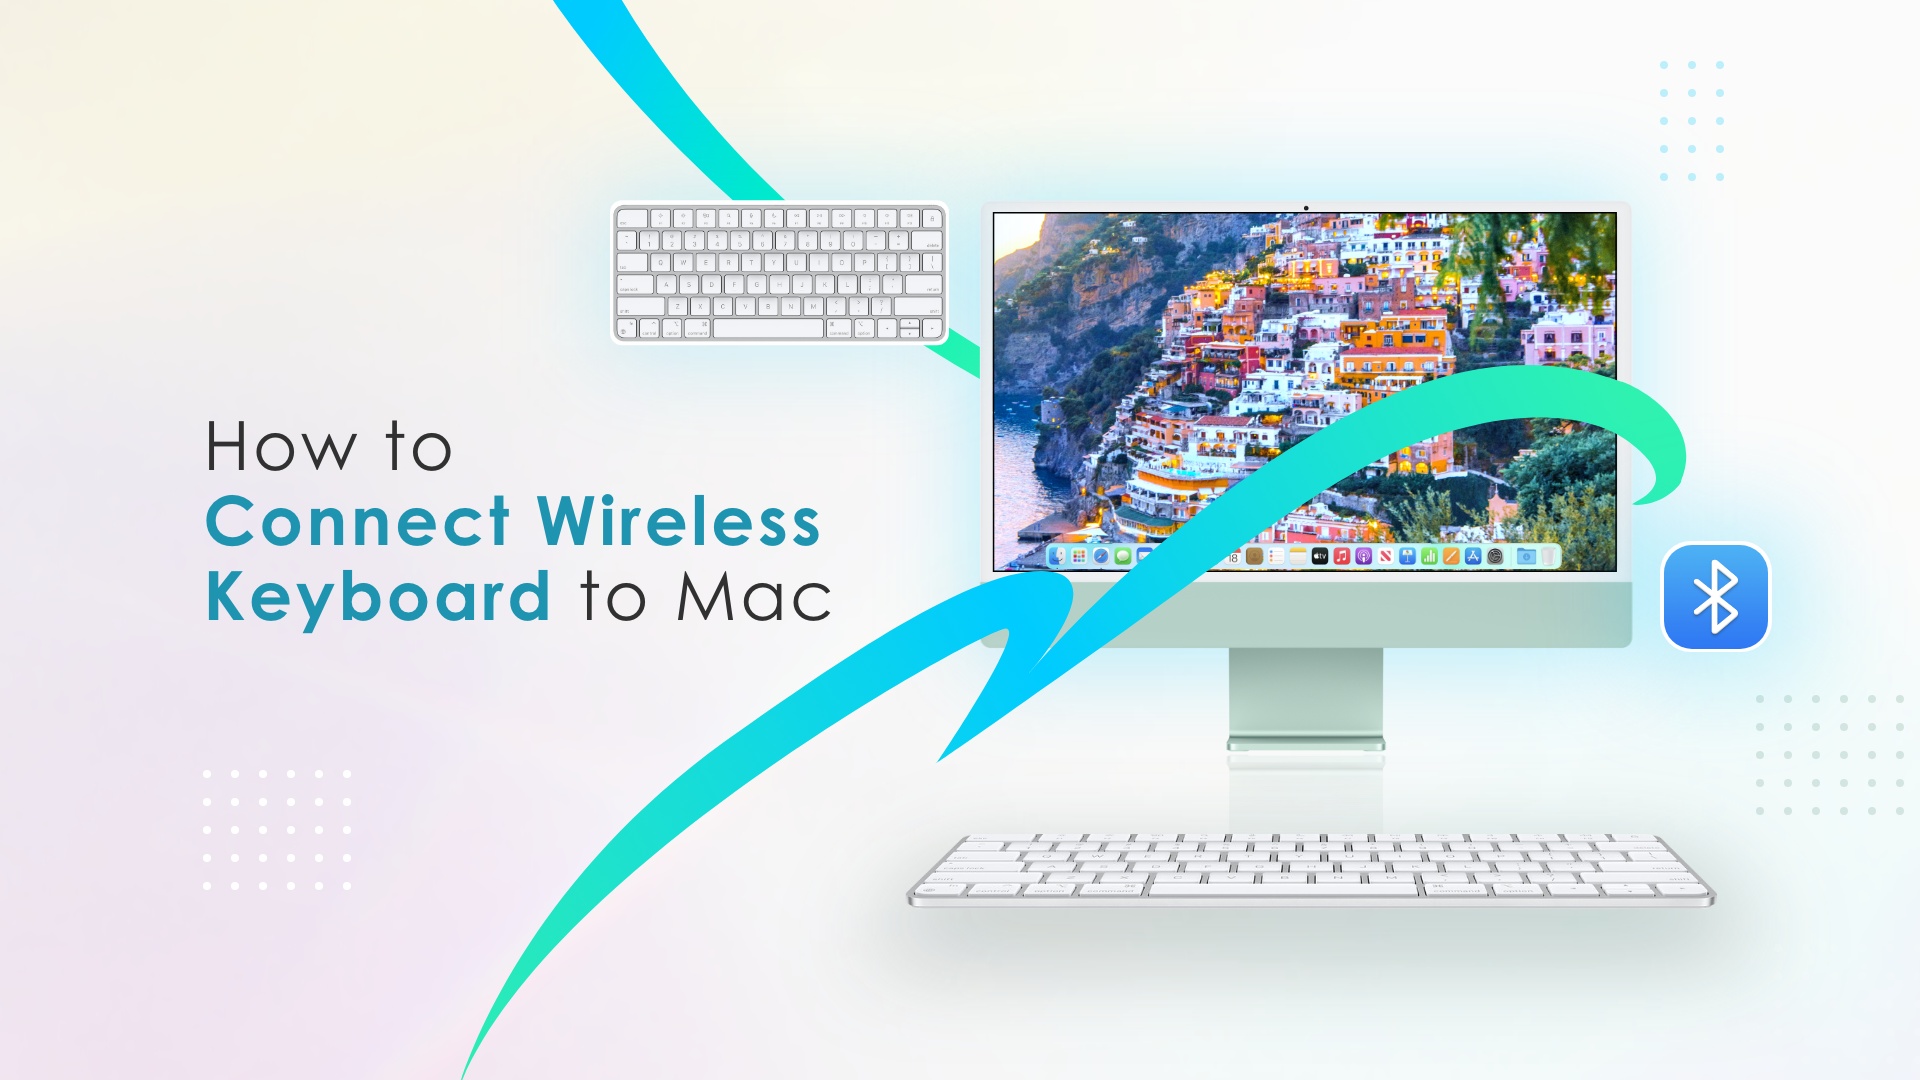 How to Connect Wireless Keyboard to Mac